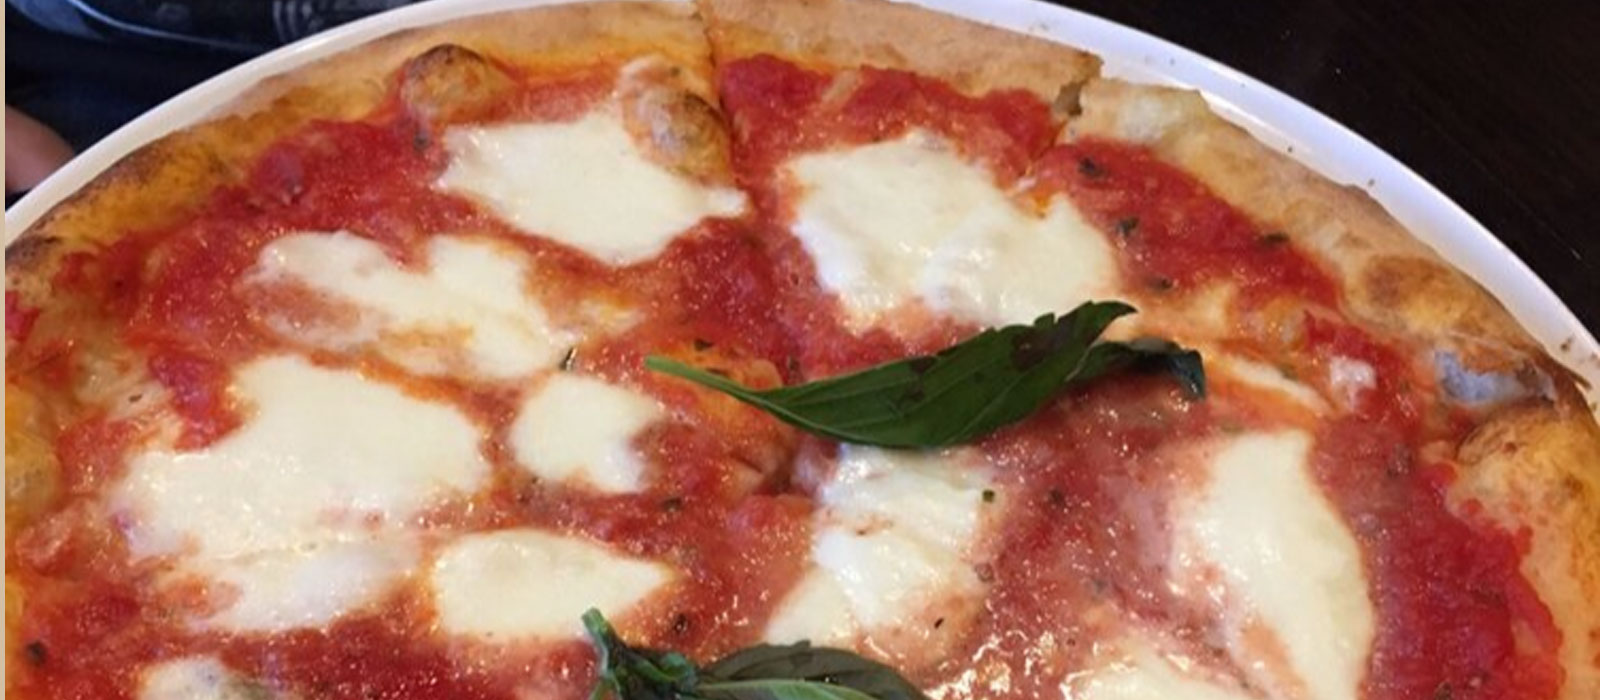 PIZZA MARGHERITA Traditional Italian Pie, With Fresh Imported Mozzarella cheese, tomato sauce, olive oil and basil